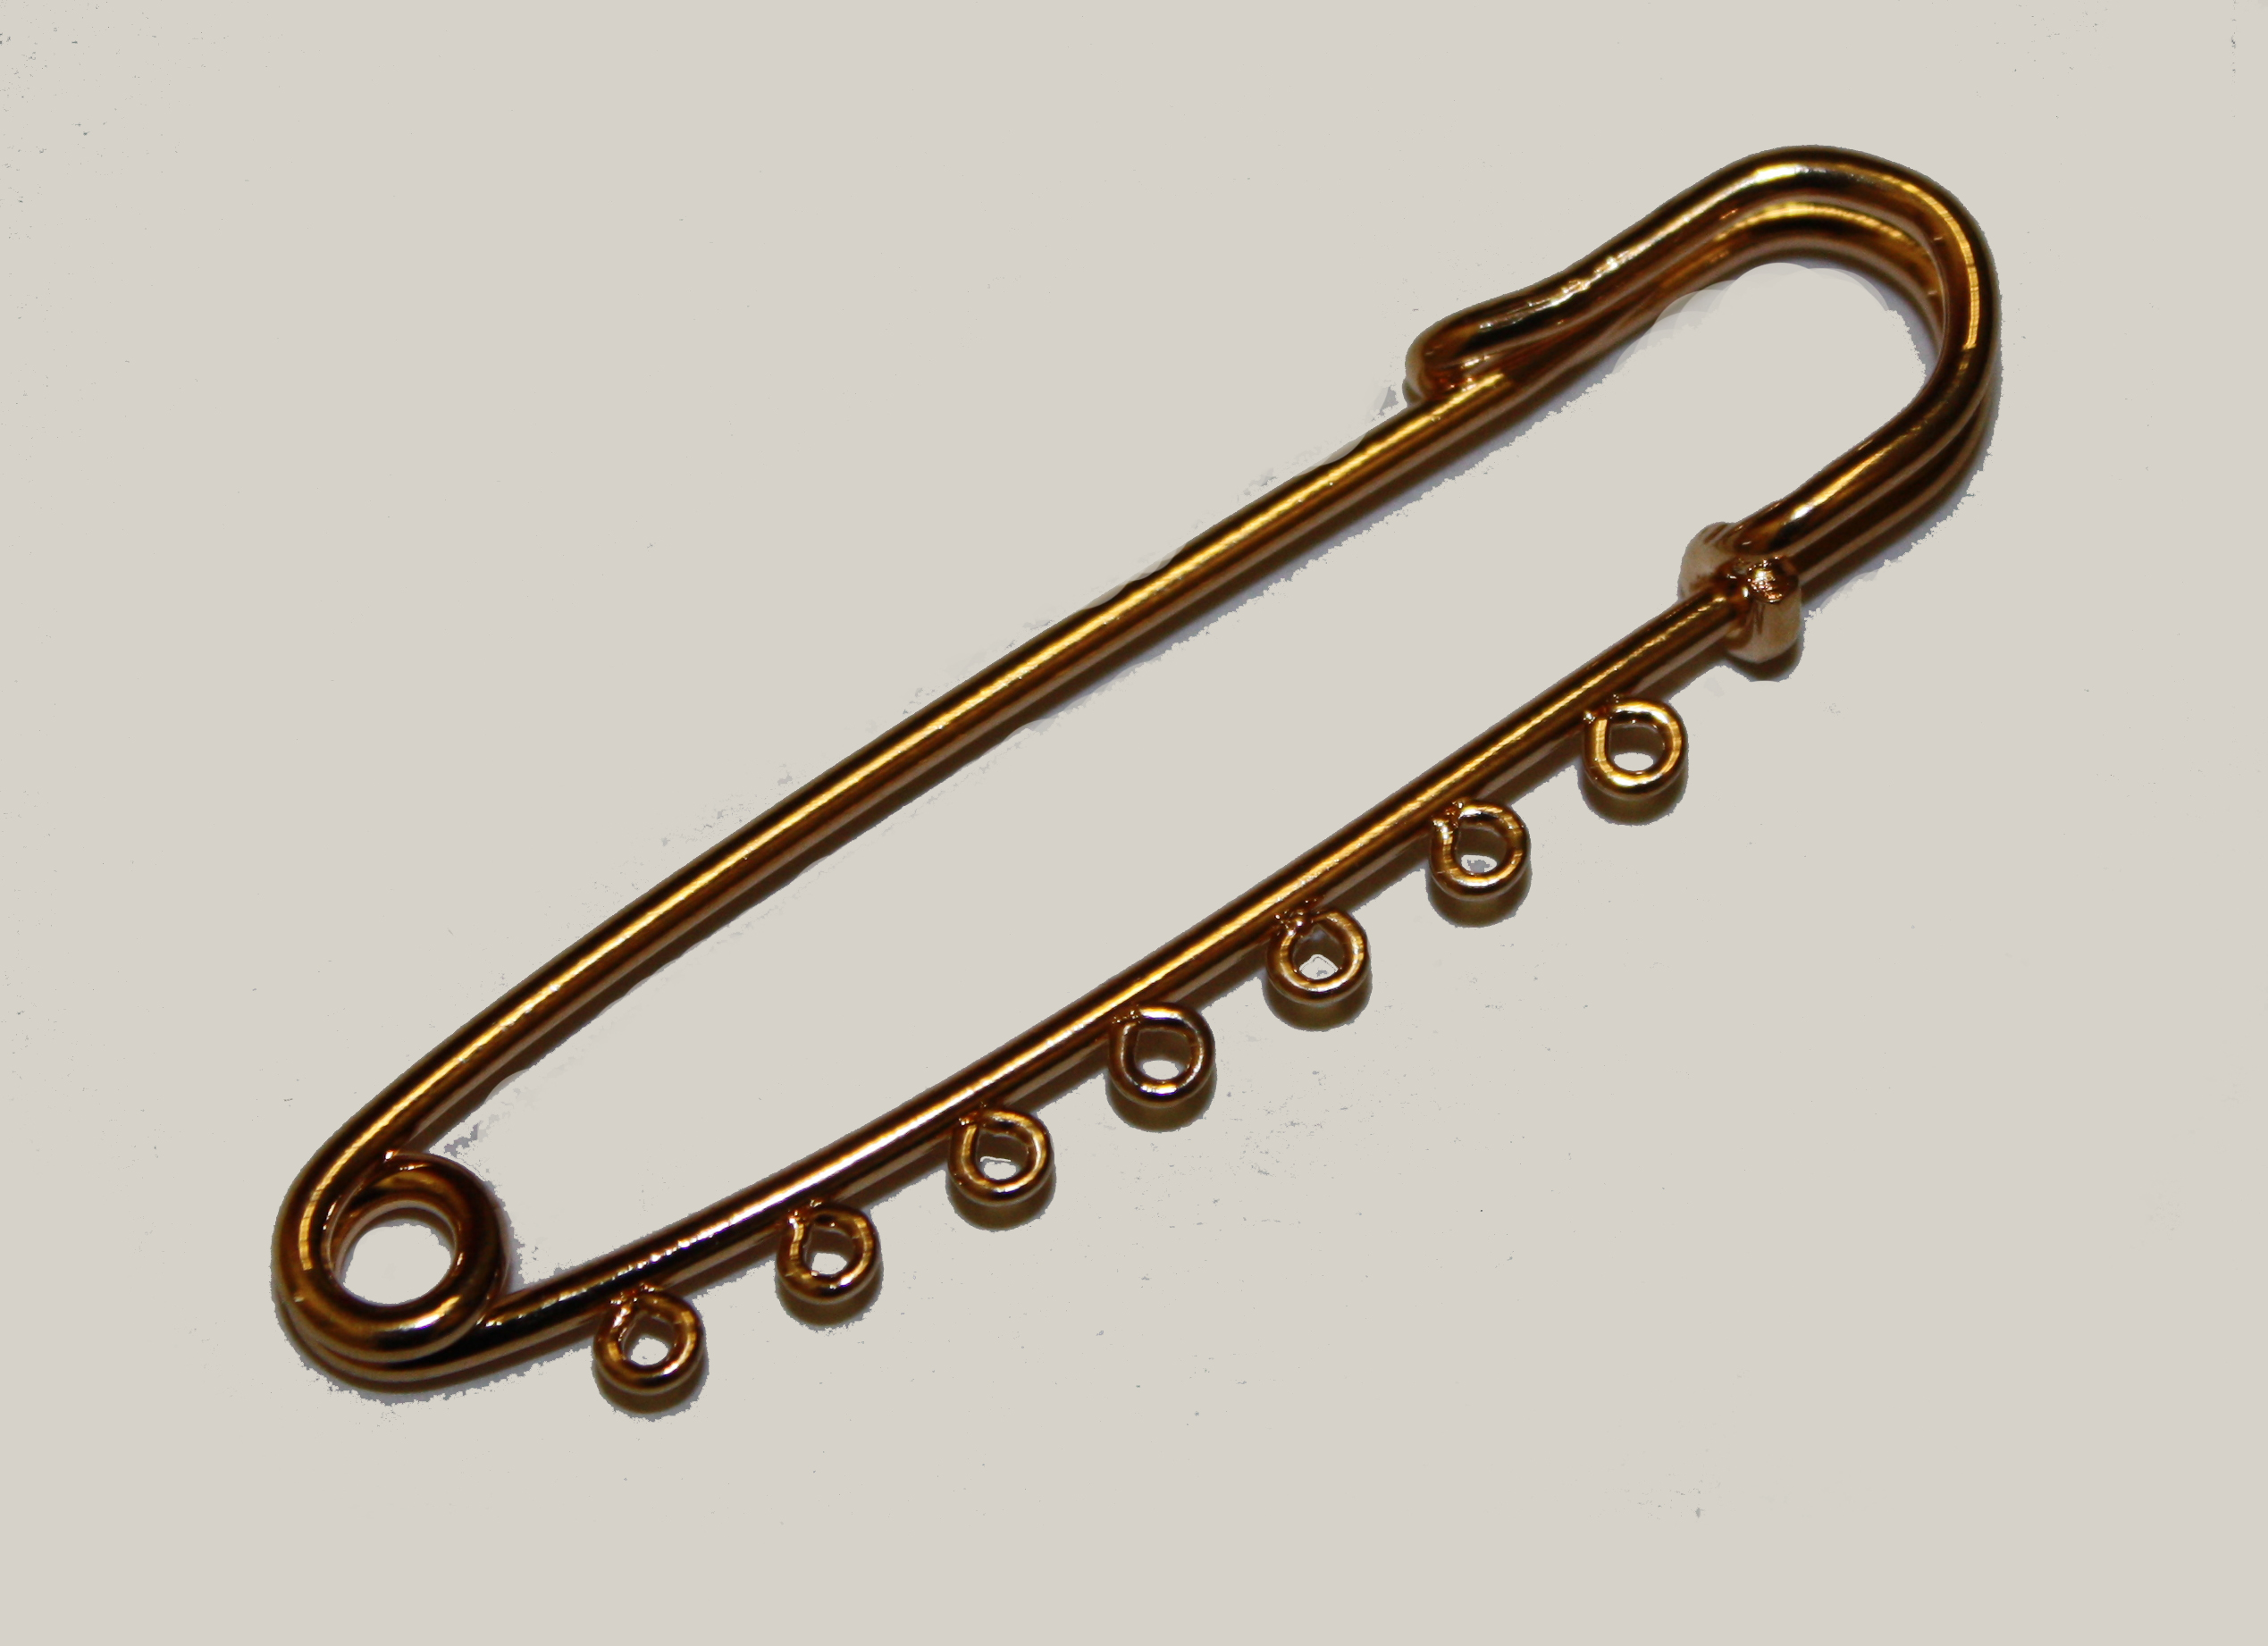 Kilt Pin 7 Loops 57mm - Gold Plated (1 per pack)